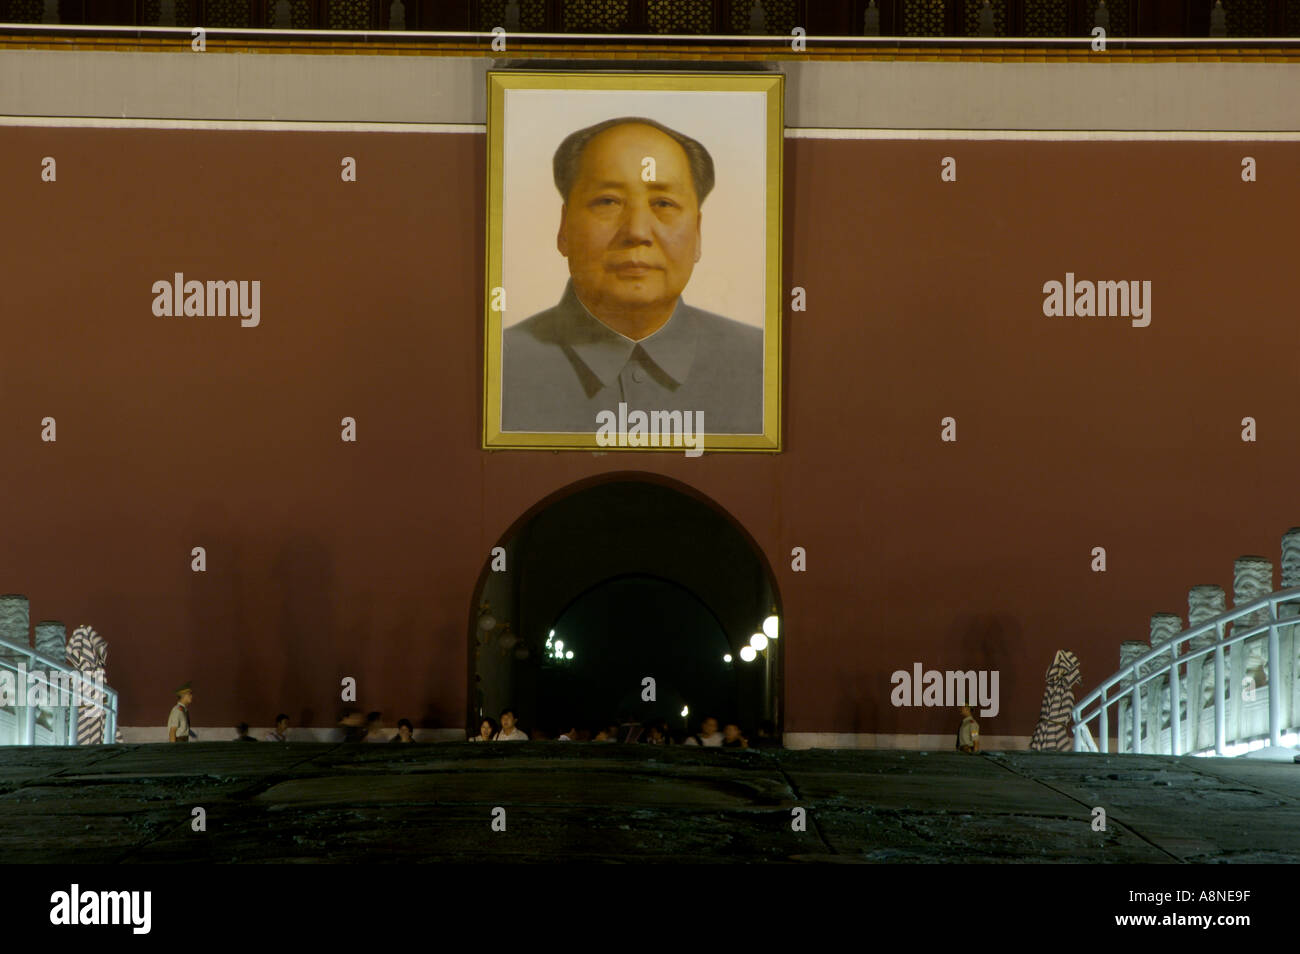 China Beijing - The Tiananmen Square By Night - Portrait Of Former President Mao Zedong And The Temple Of Heavenly Peace Stock Photo